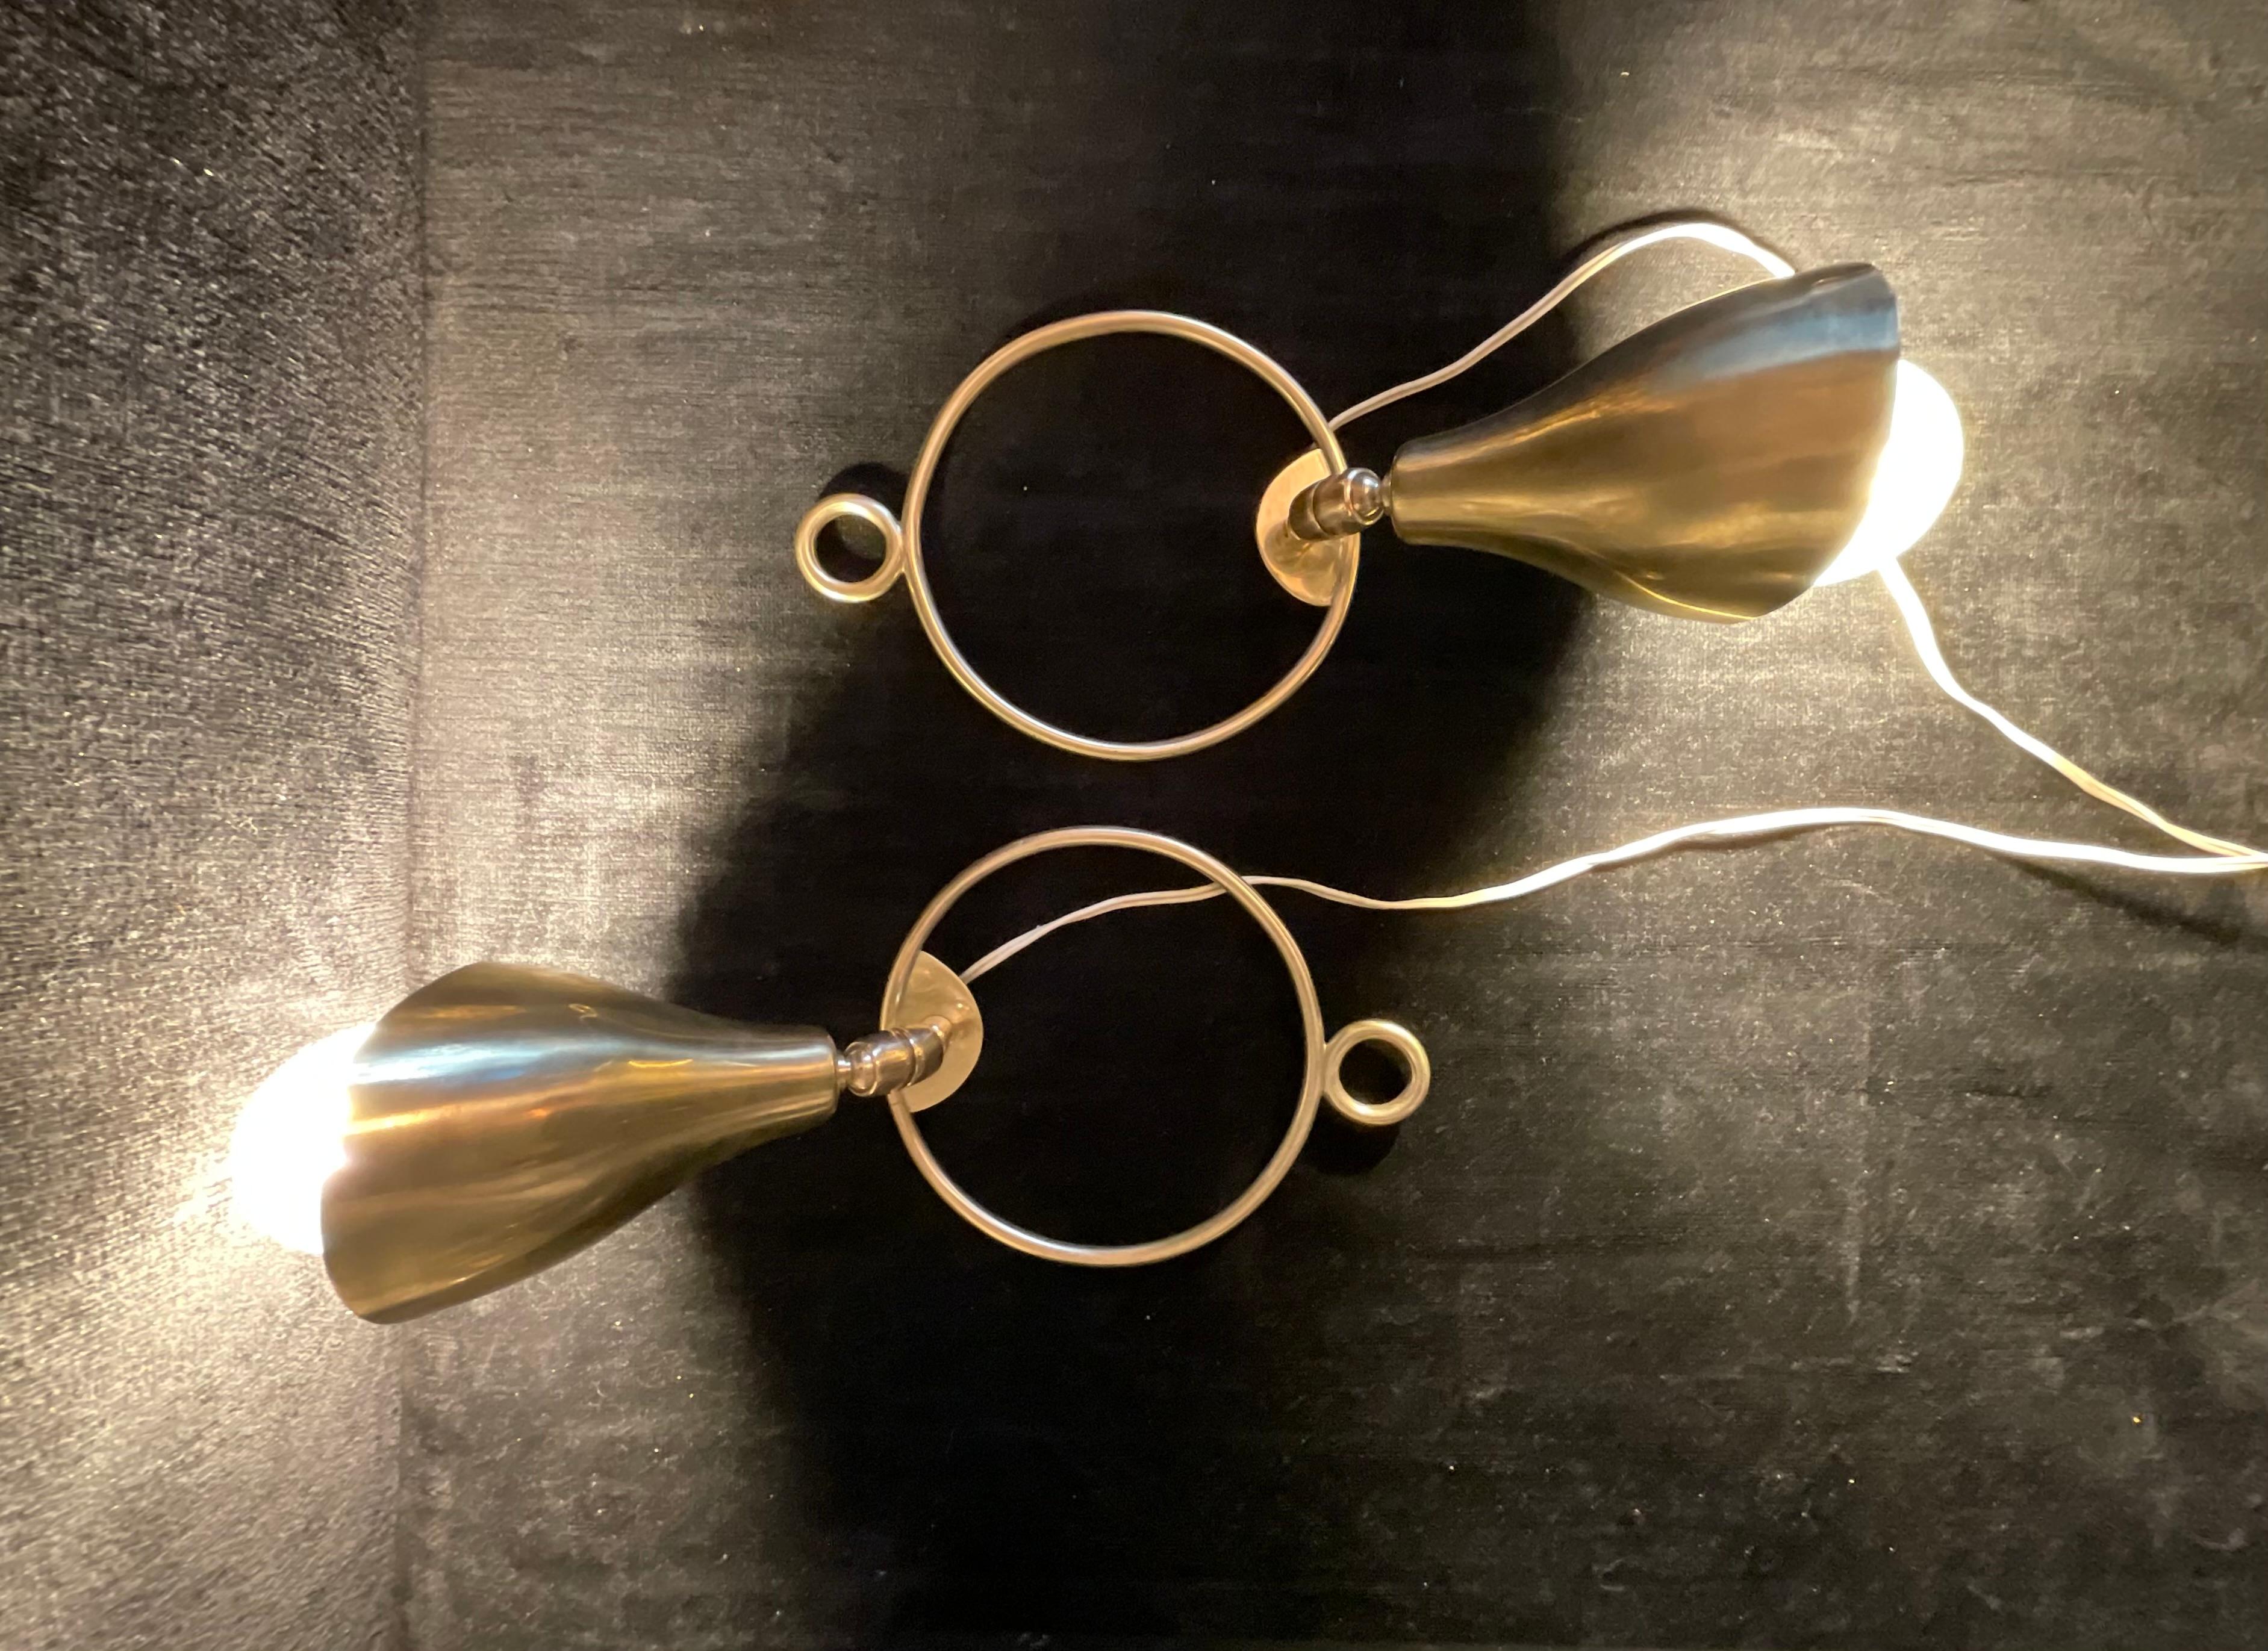 SARFATTI Gino - ARTELUCE -Pair of brass wall or floor sconces  For Sale 4